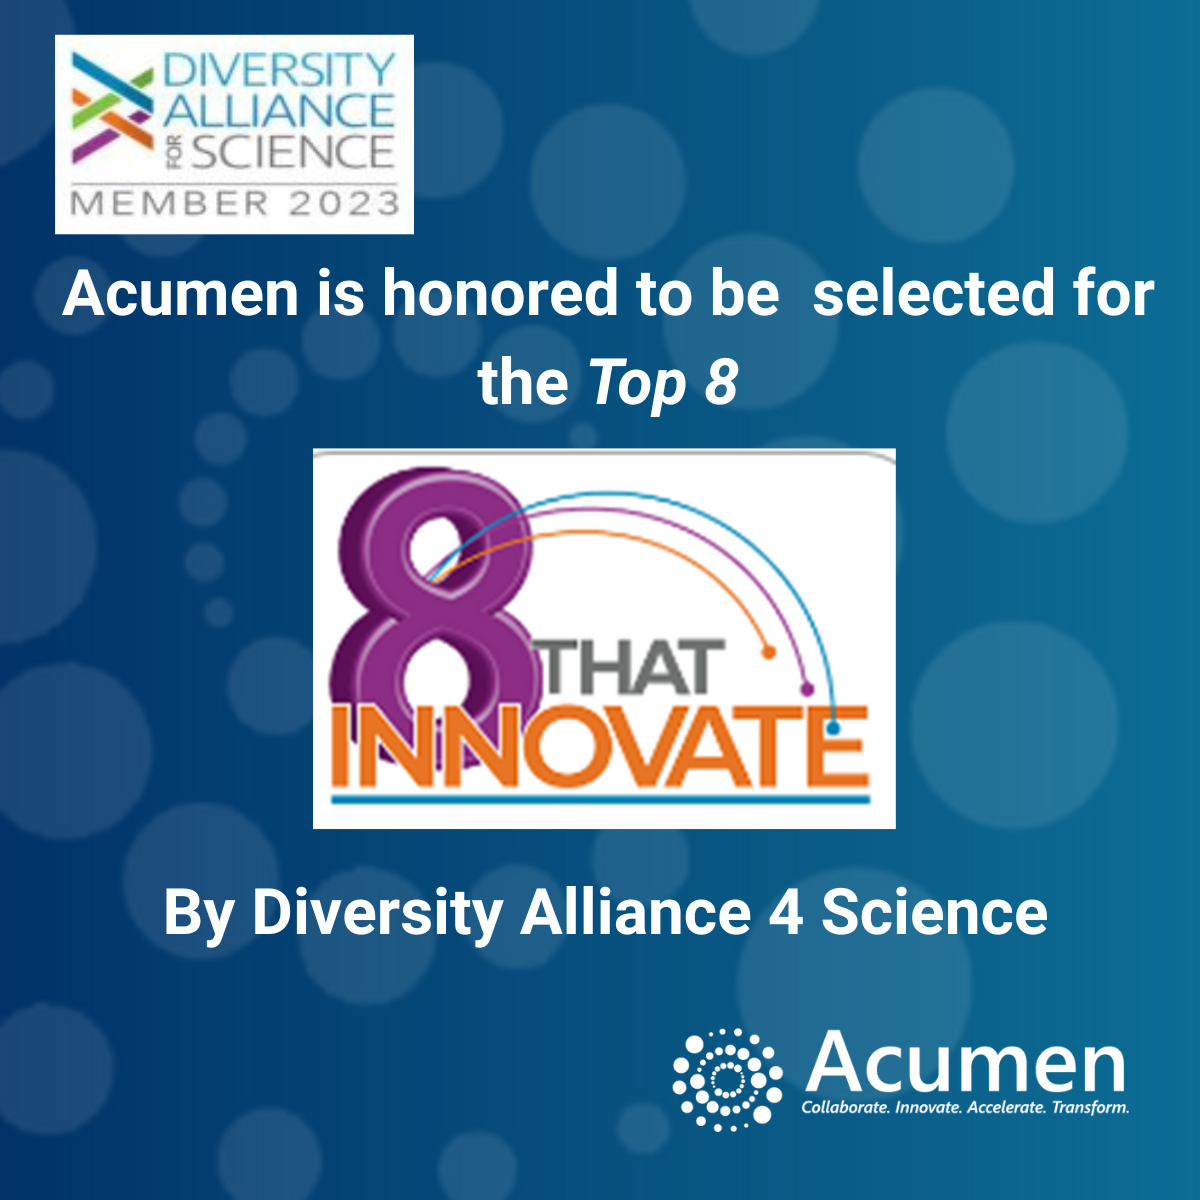 Acumen is honored to be selected in the Top 8